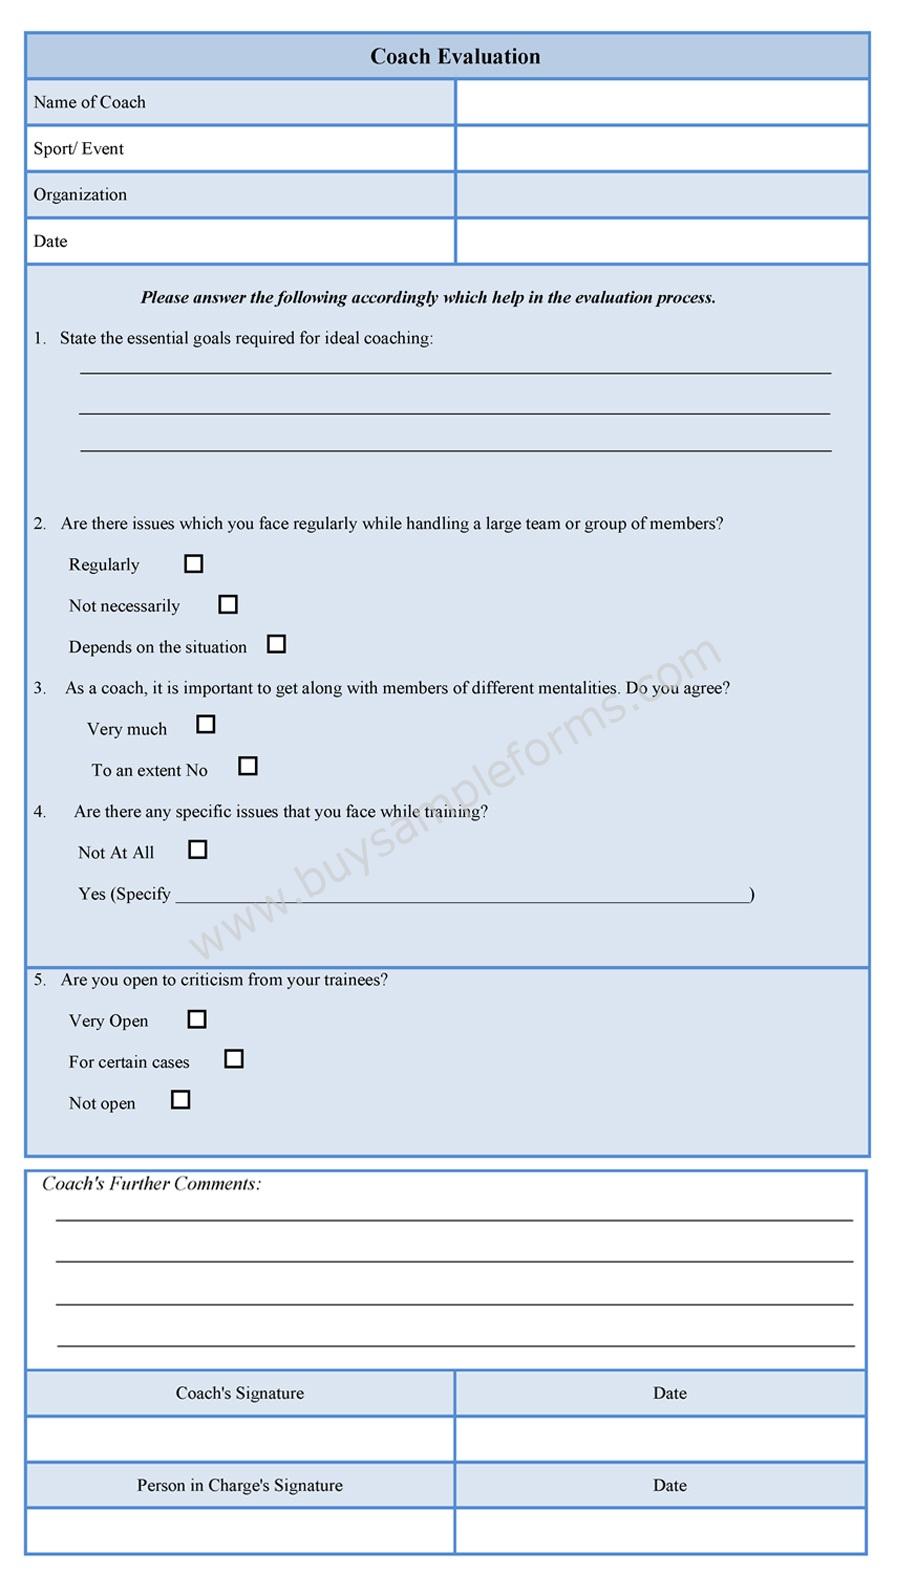 Coach Evaluation Form Sample Forms